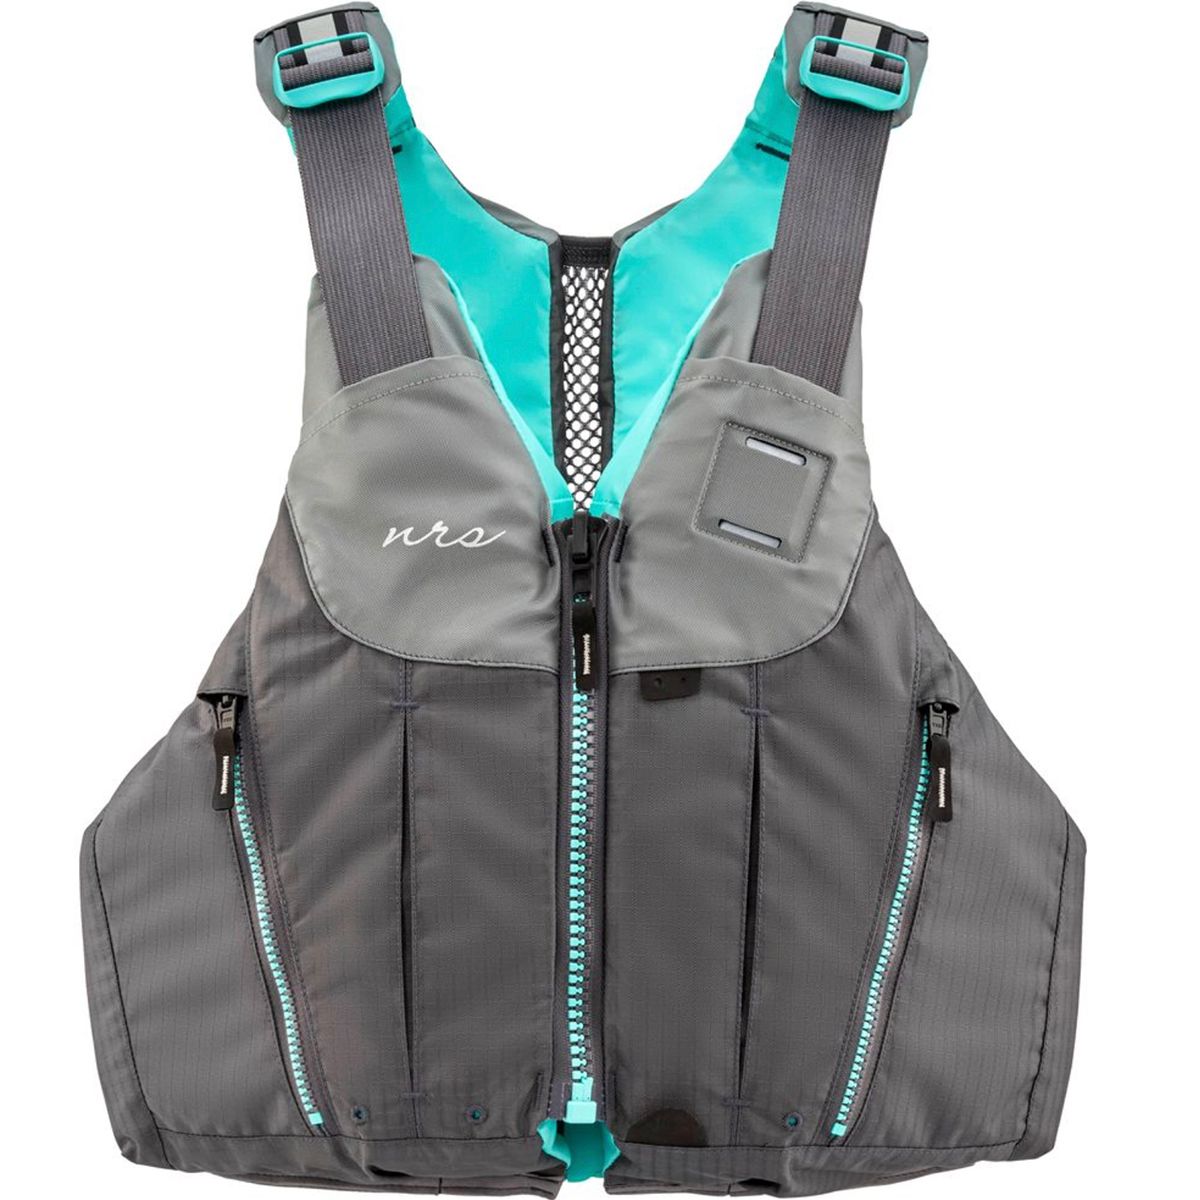 NRS Nora Personal Flotation Device - Women's